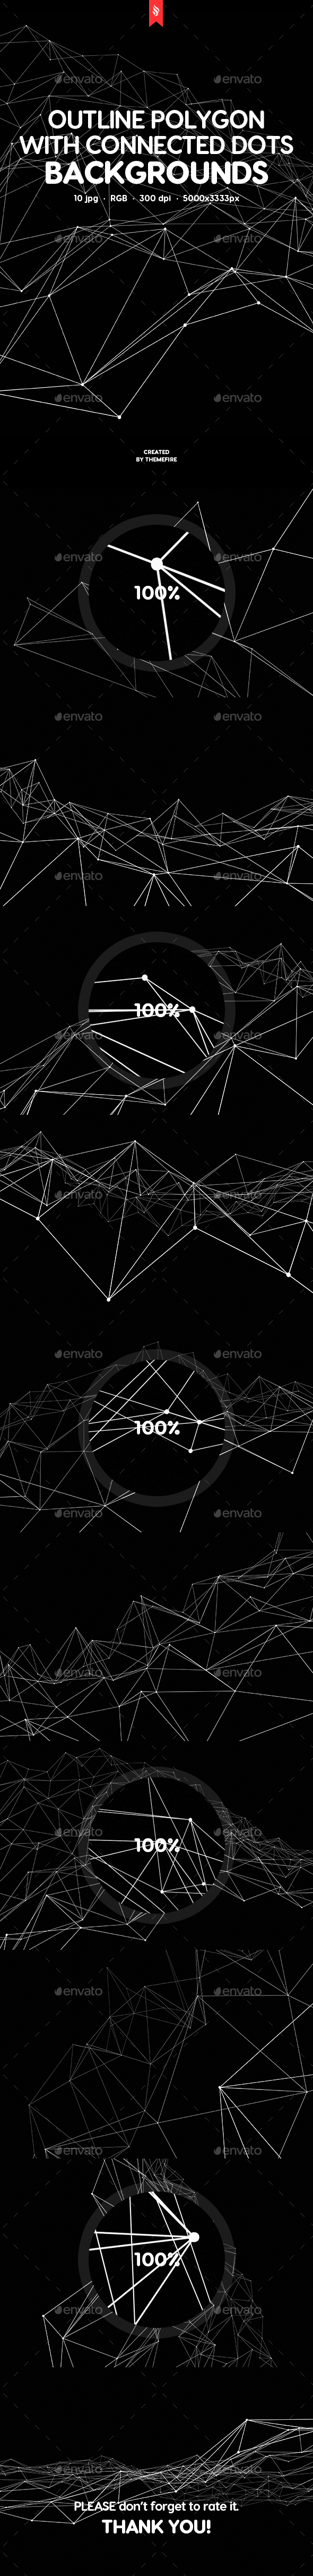 Outline Polygon with Connected Dots Backgrounds